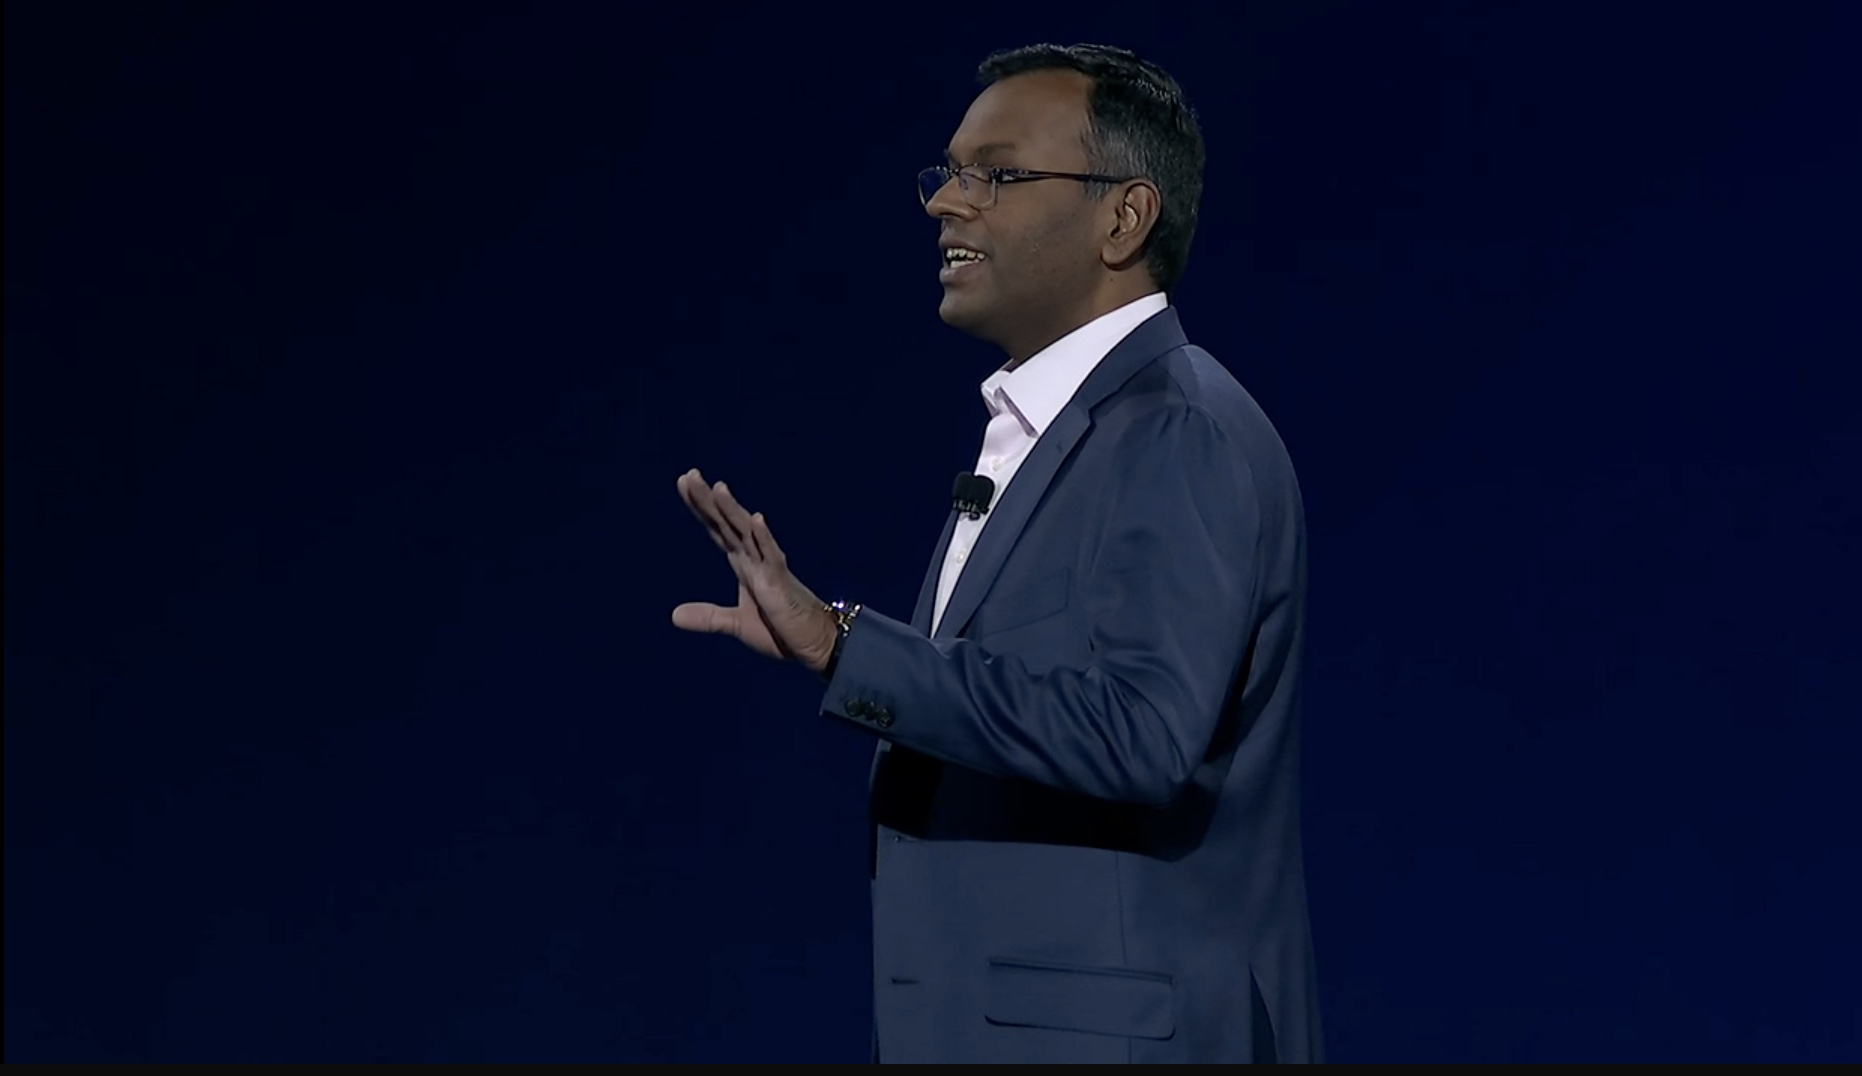 AWS VP of AI Swami Sivasubramanian on stage at re:Invent 2021.